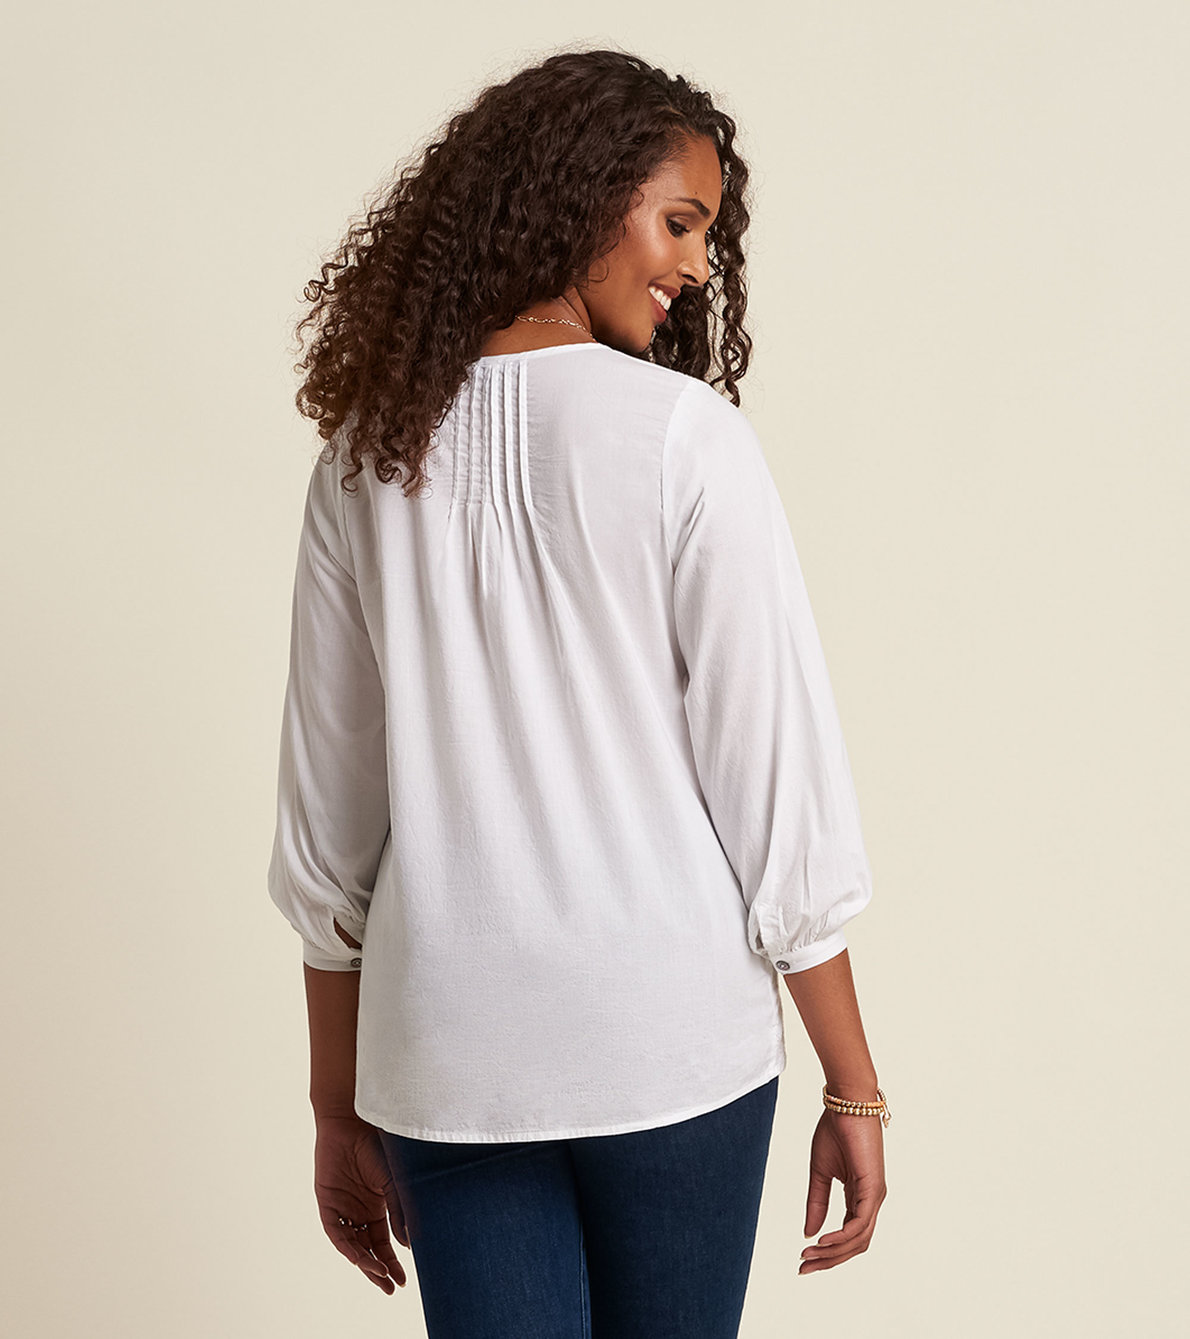 View larger image of Olivia Blouse - White